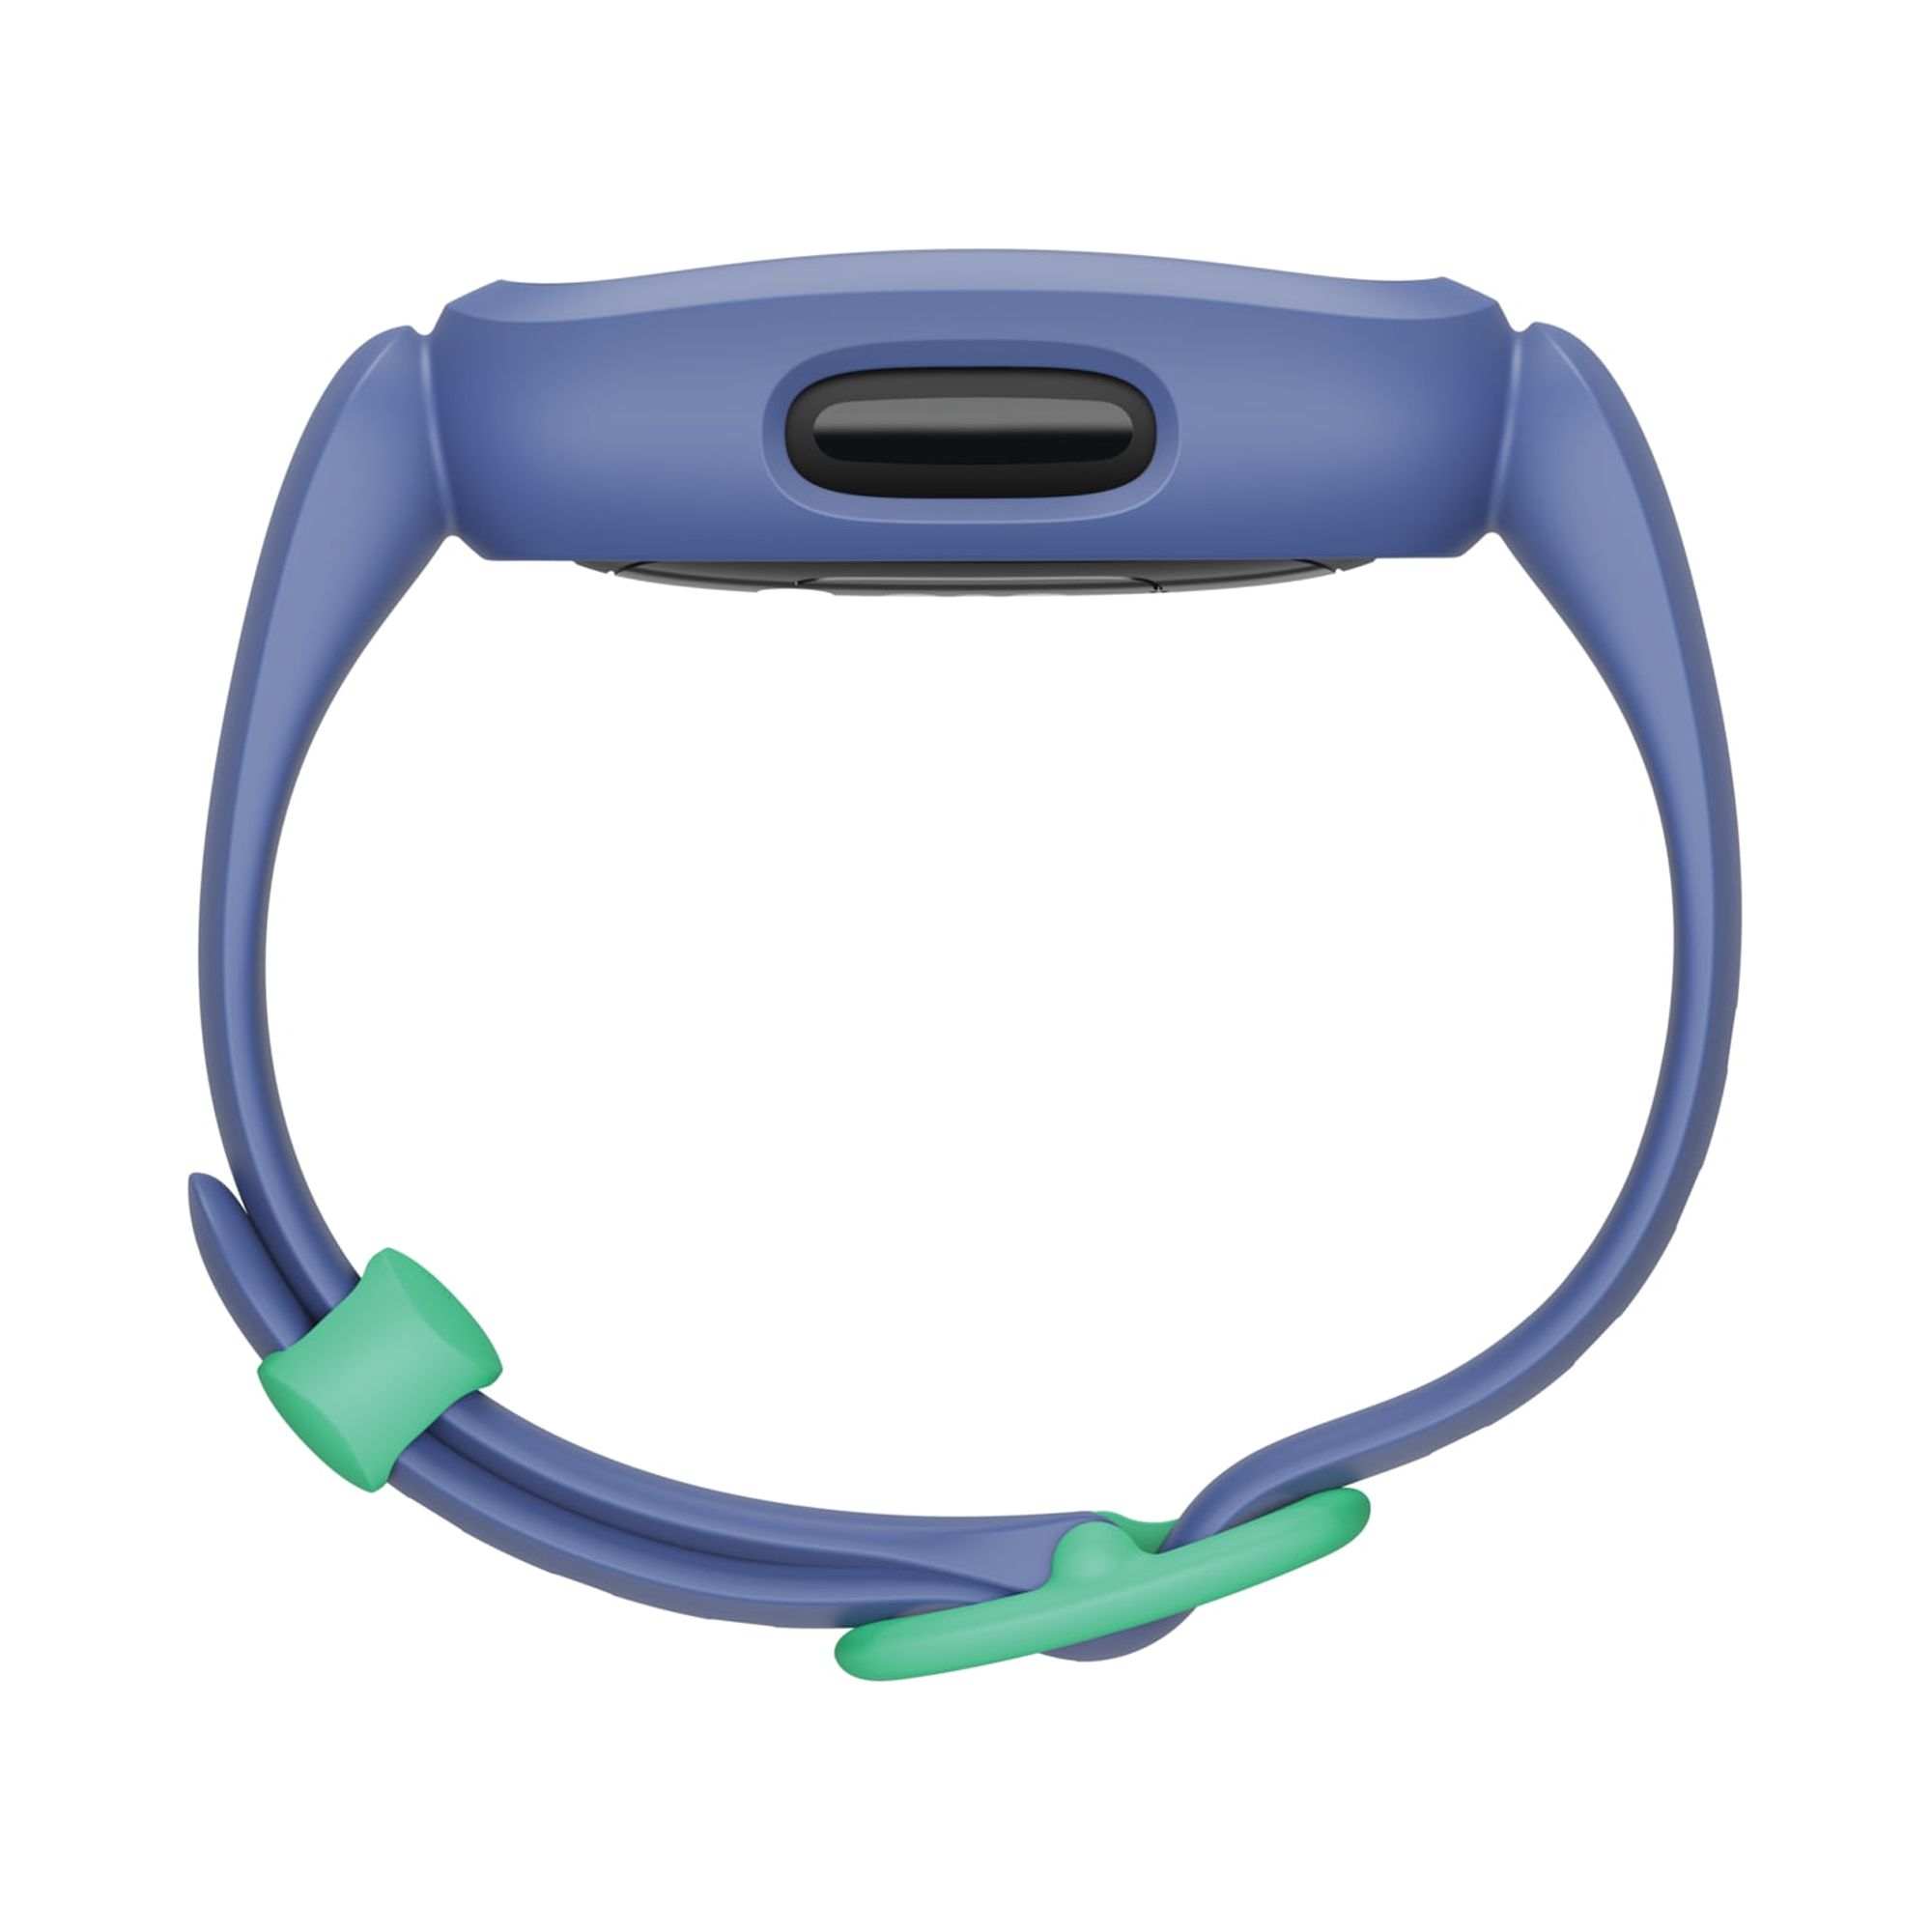 Fitbit Ace 3 Activity Tracker for Kids - Cosmic Blue/Astro Green - image 5 of 6